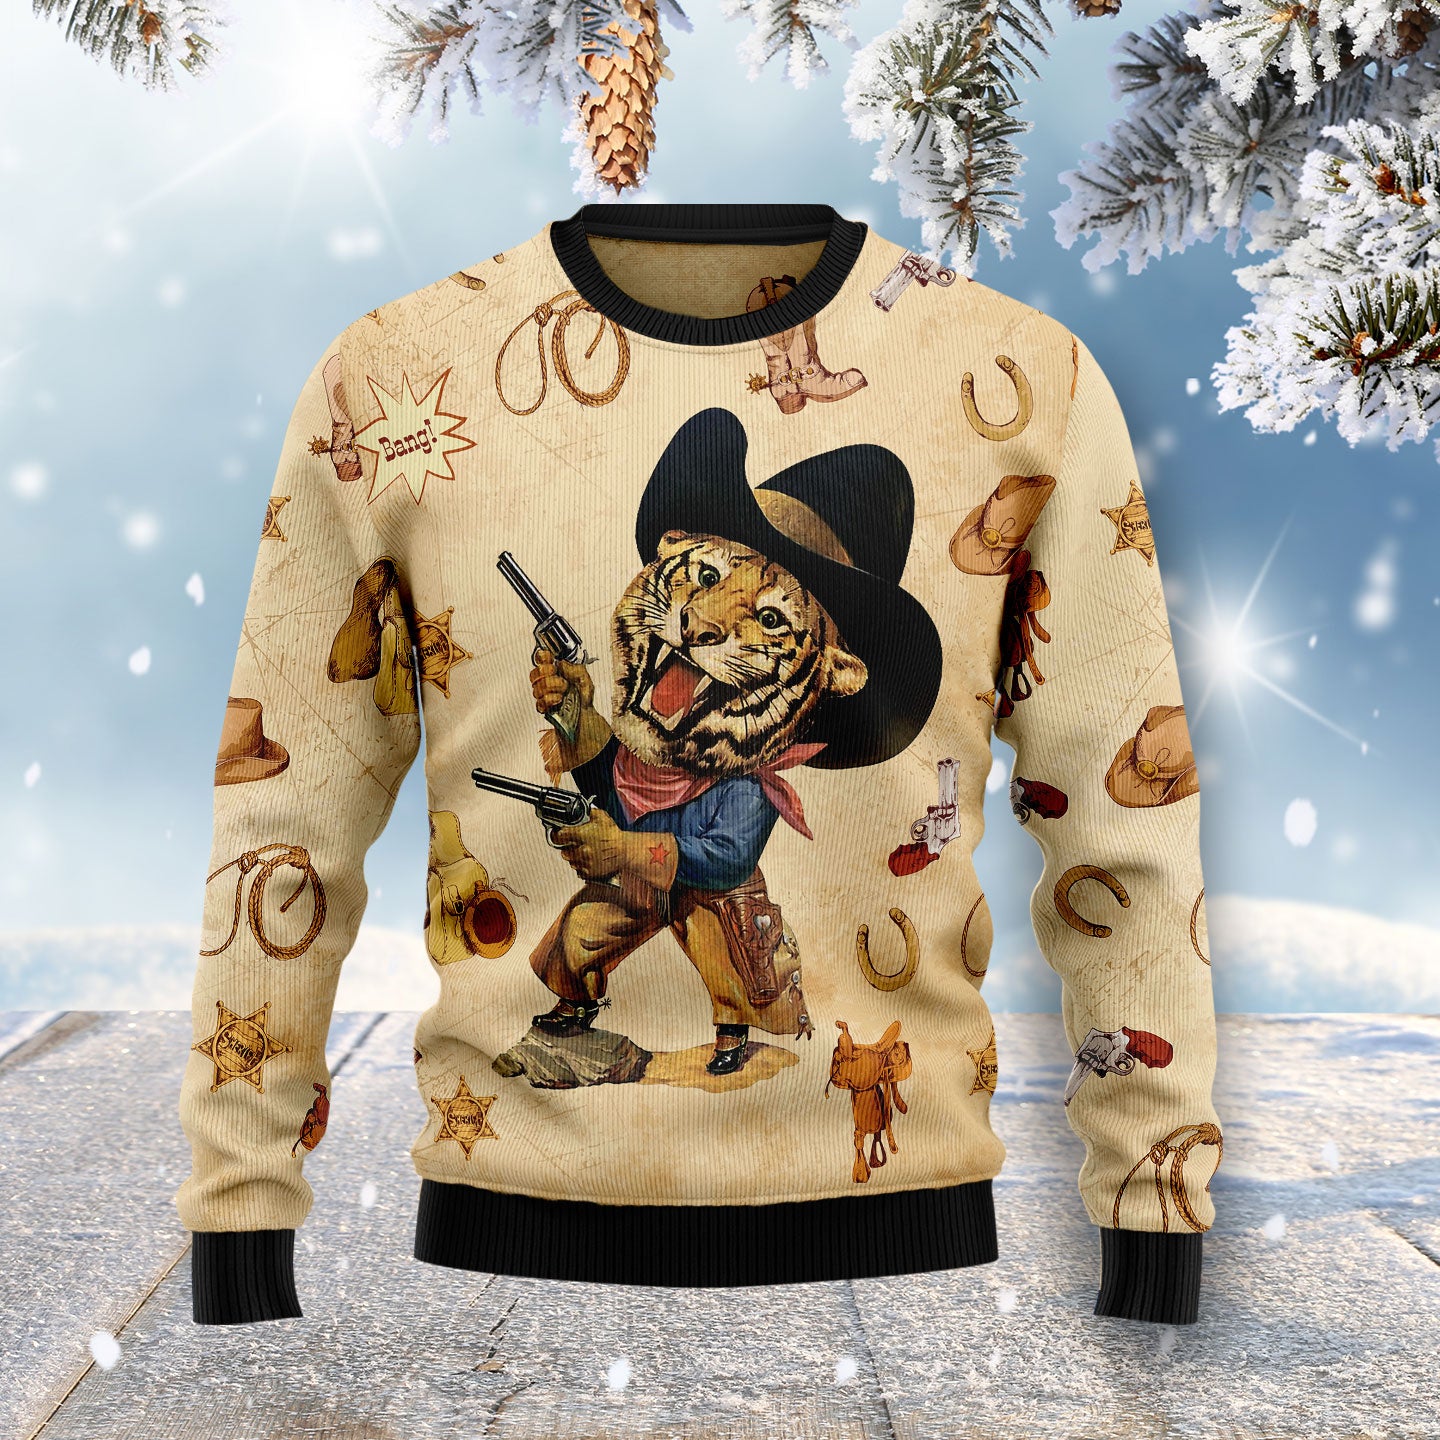 Cowboy Tiger HZ101913,Ugly Sweater Party,ugly sweater ideas - Ugly